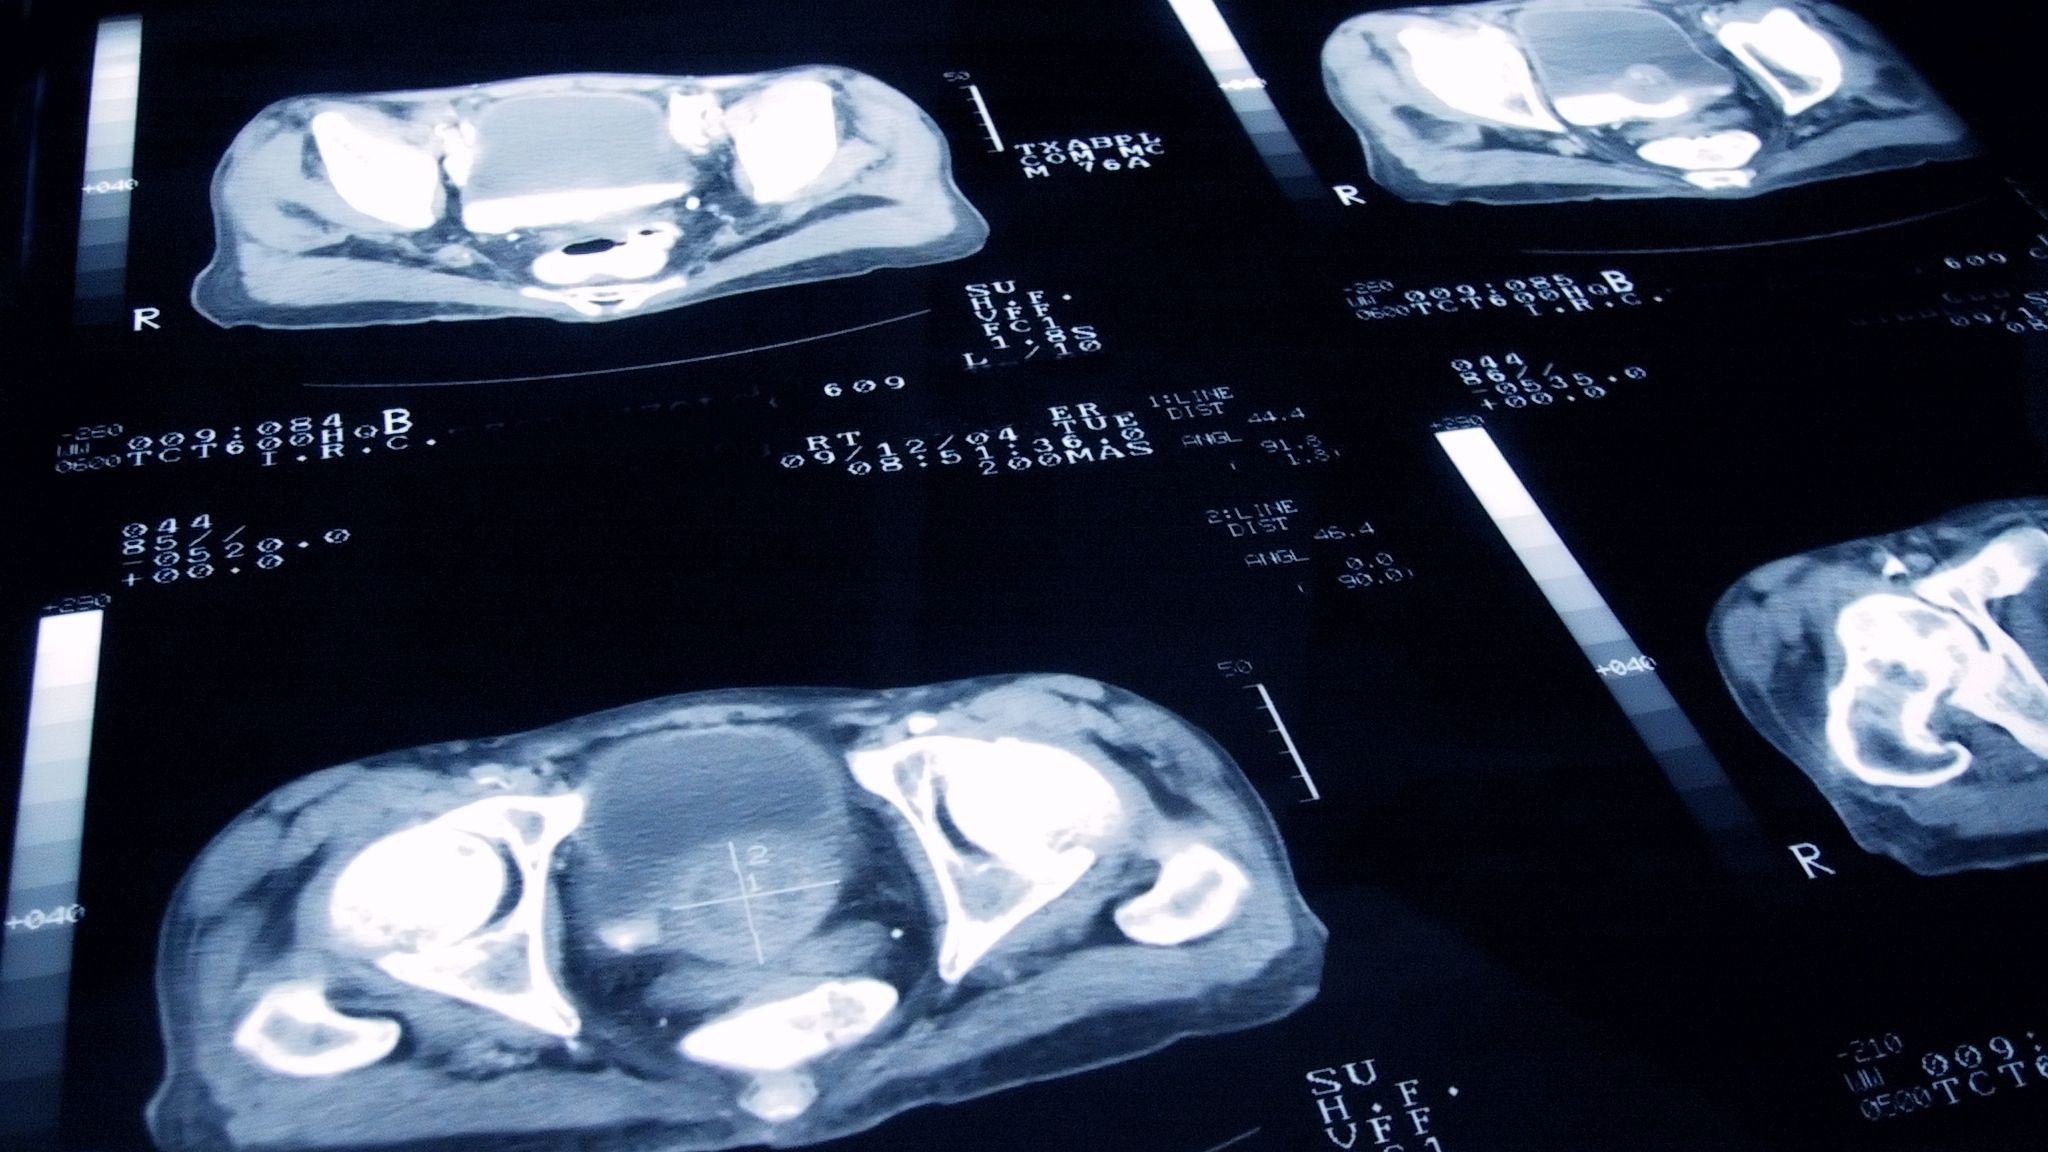 Prostate cancer: Deaths could be 'significantly reduced' by using MRI scans, study suggests